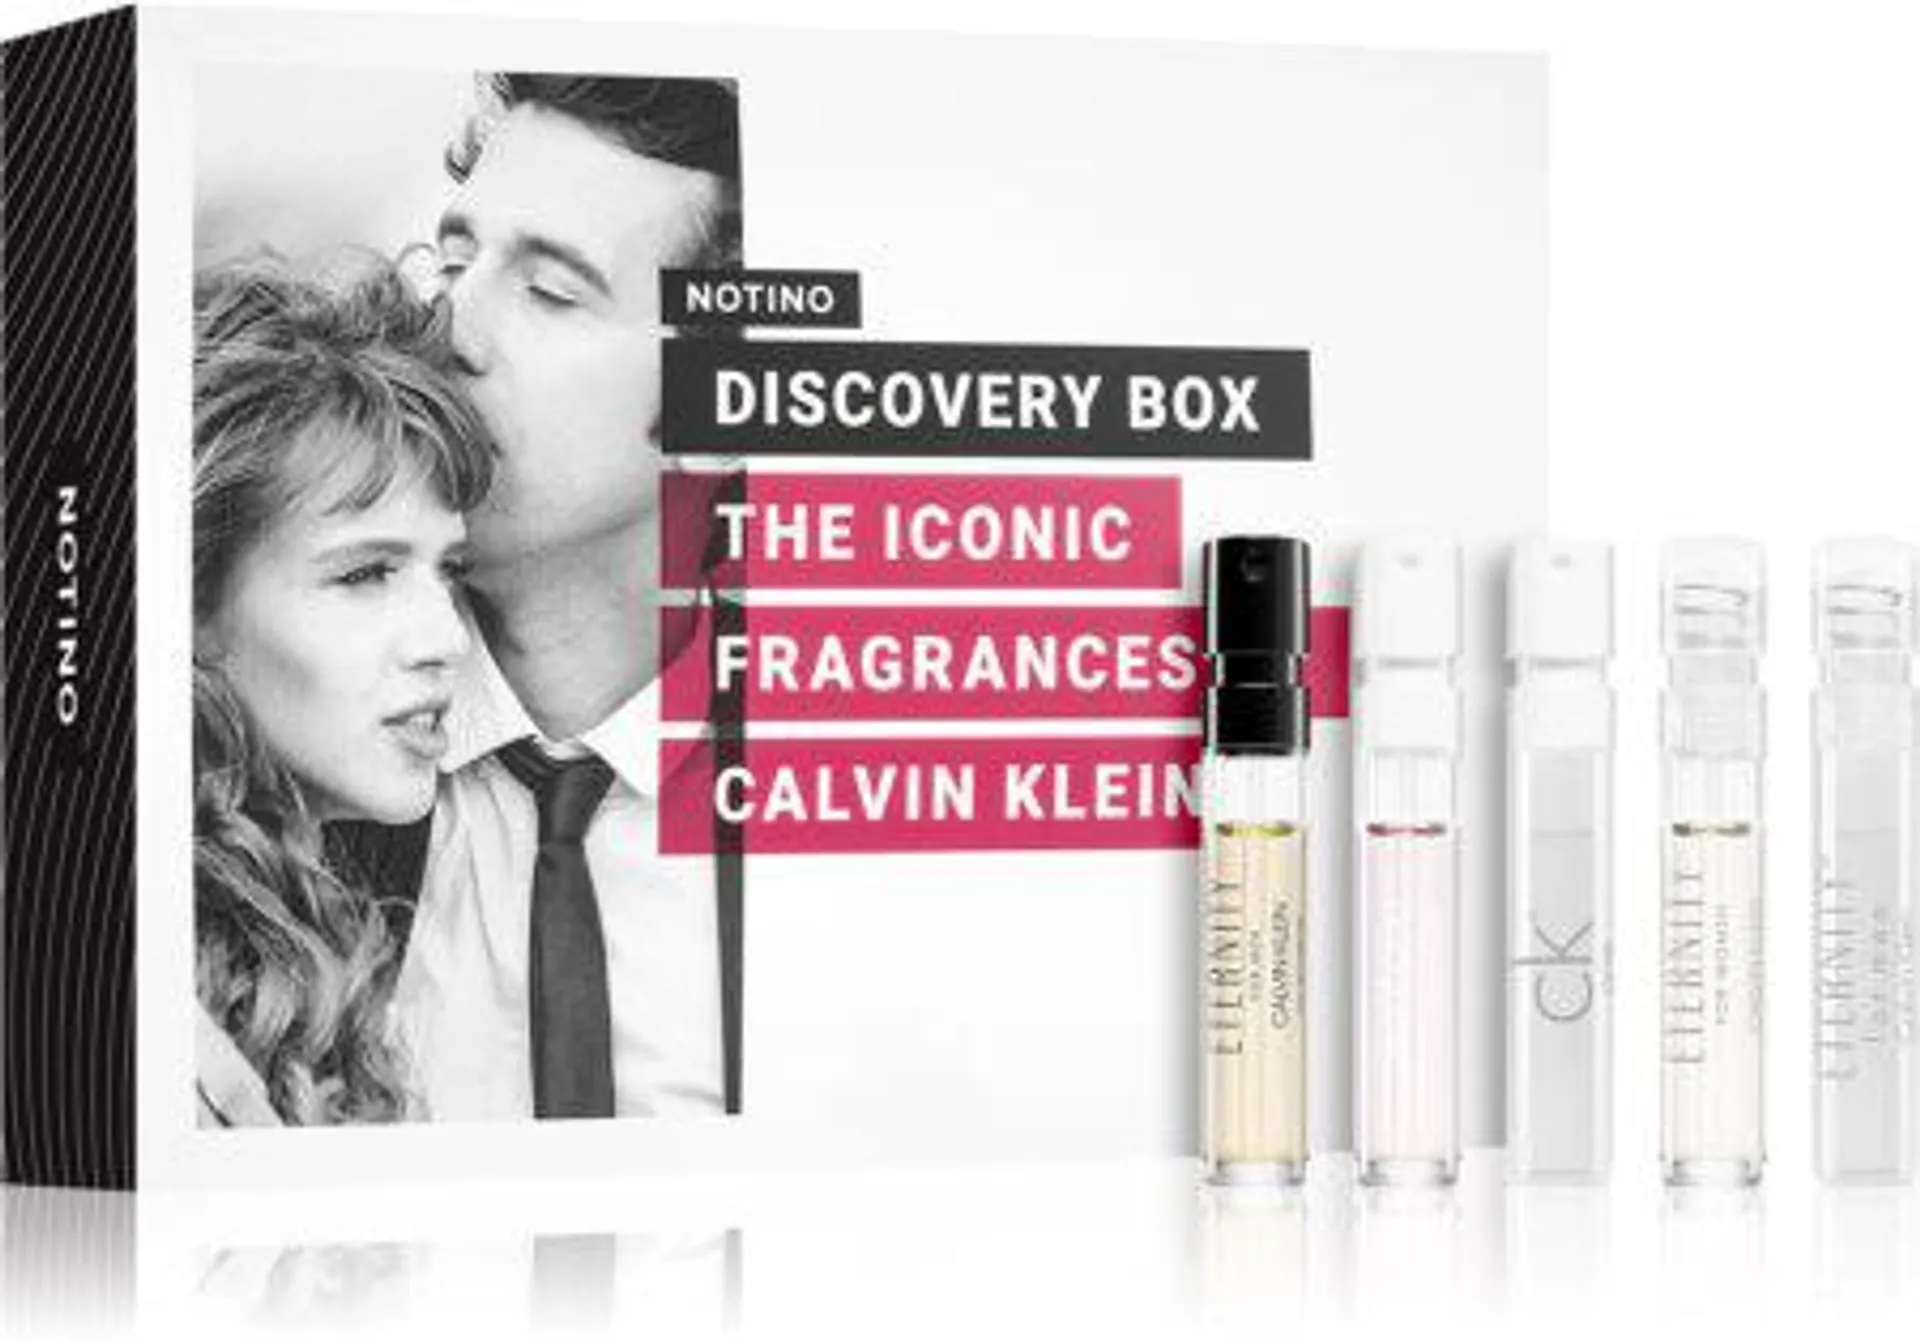 Discovery Box Notino The Iconic Fragrances by Calvin Klein